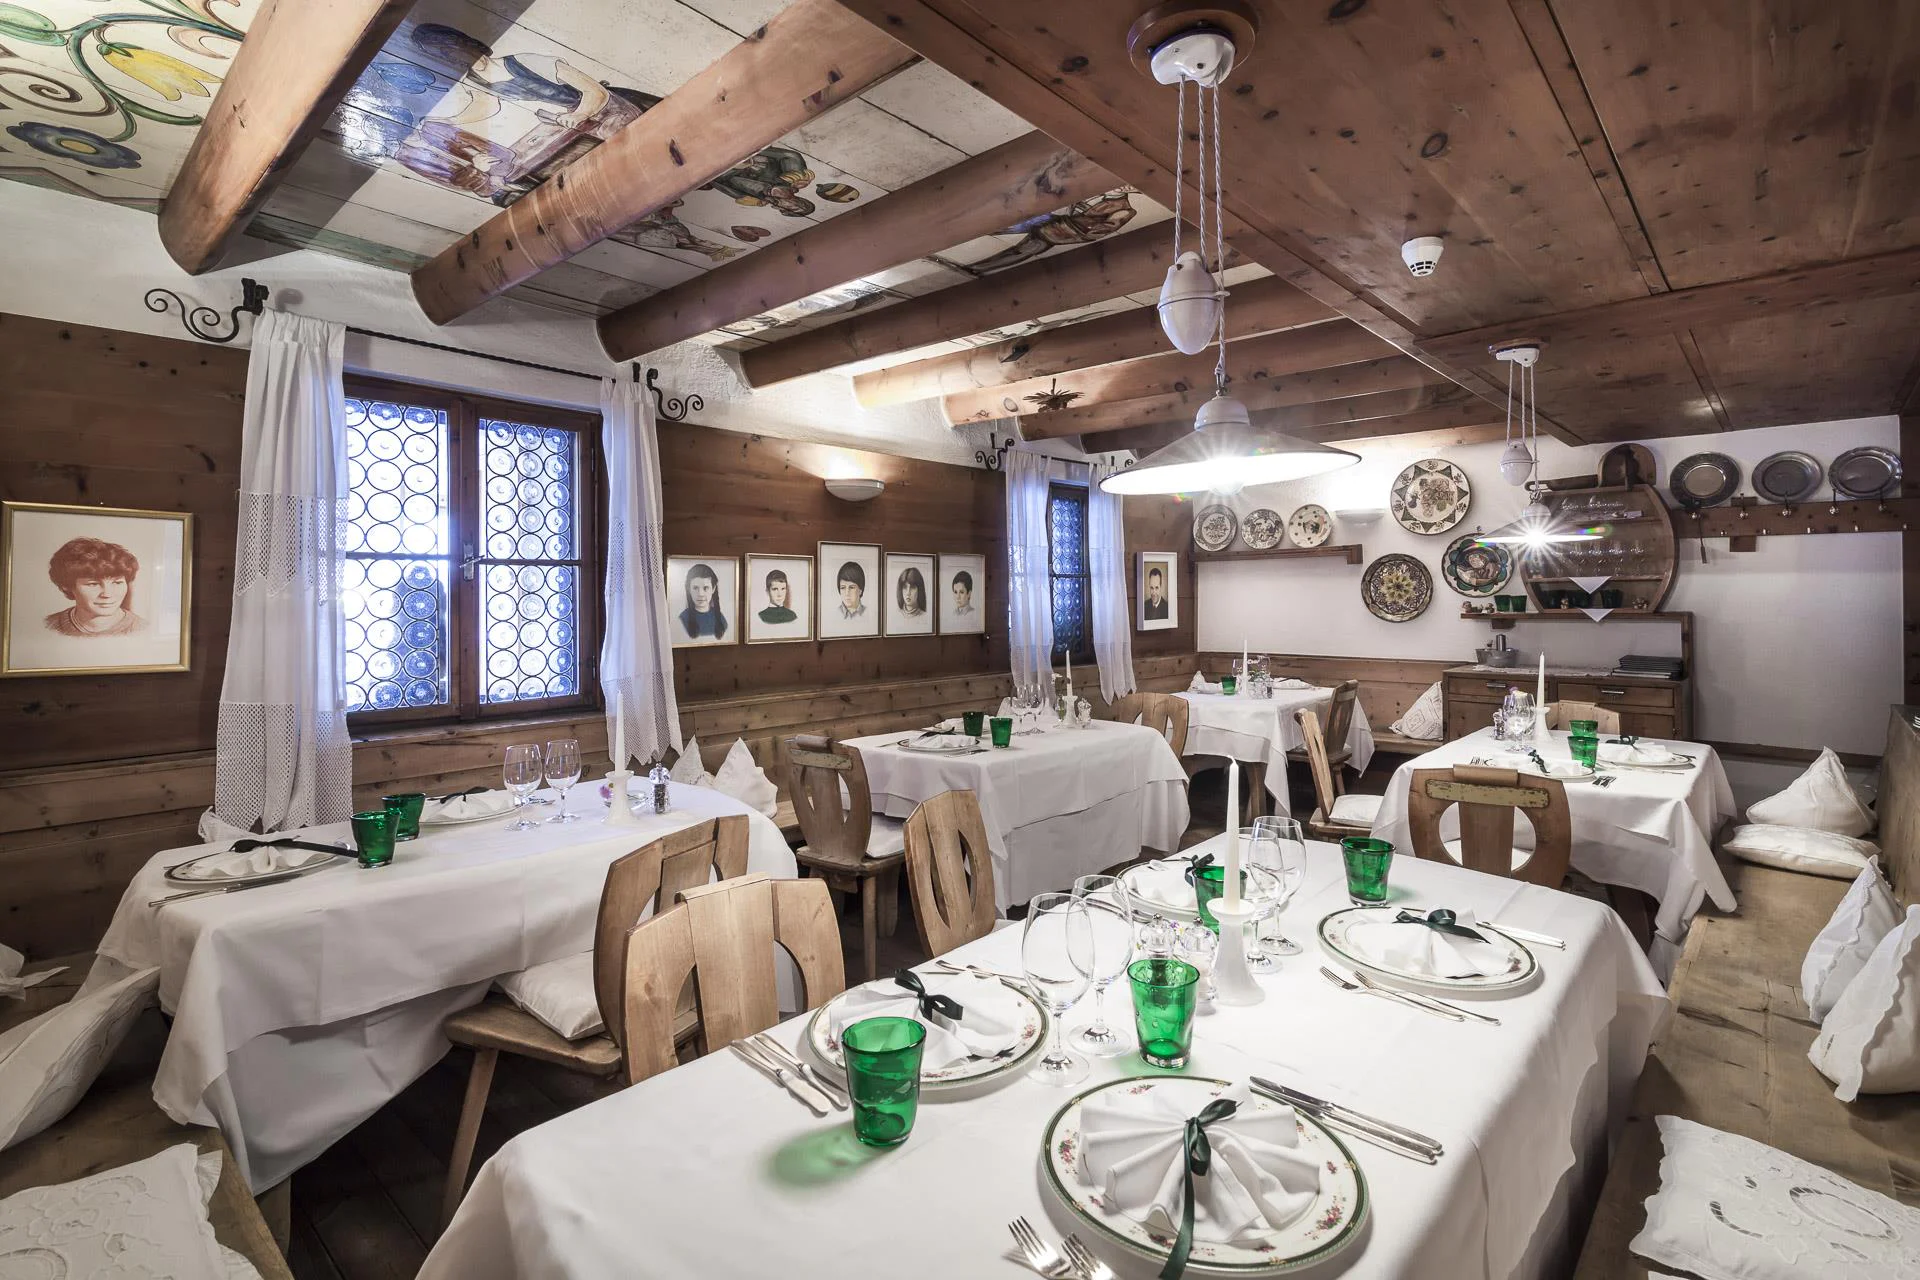 Hotel Drumlerhof Sand in Taufers/Campo Tures 9 suedtirol.info